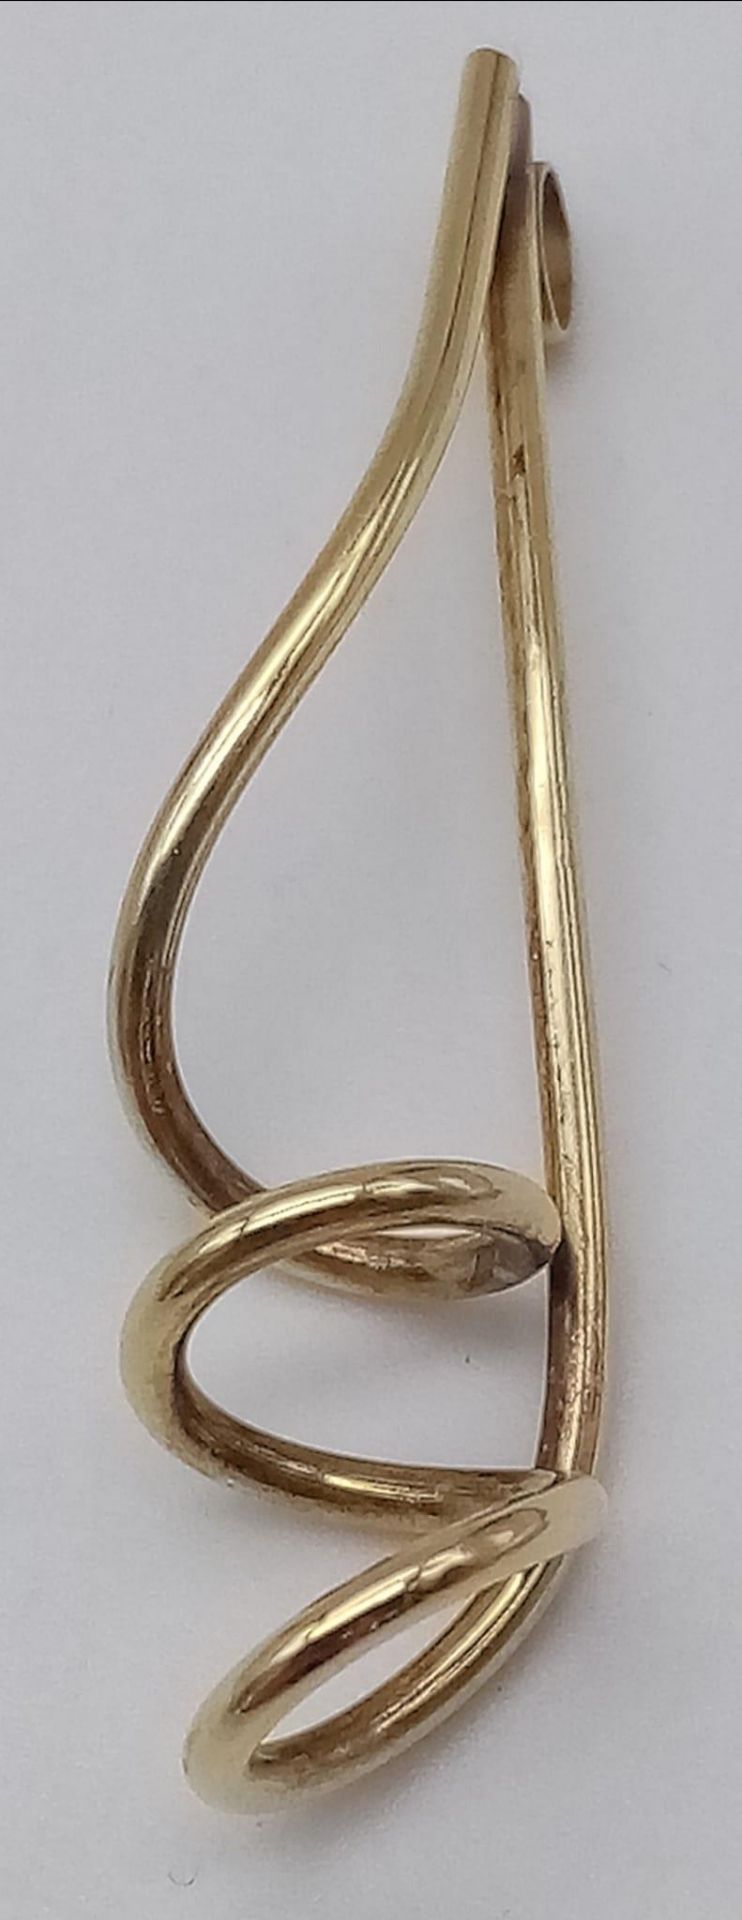 A 9K Yellow Gold Corkscrew Pendant. 4cm. 1.41g weight. - Image 3 of 4